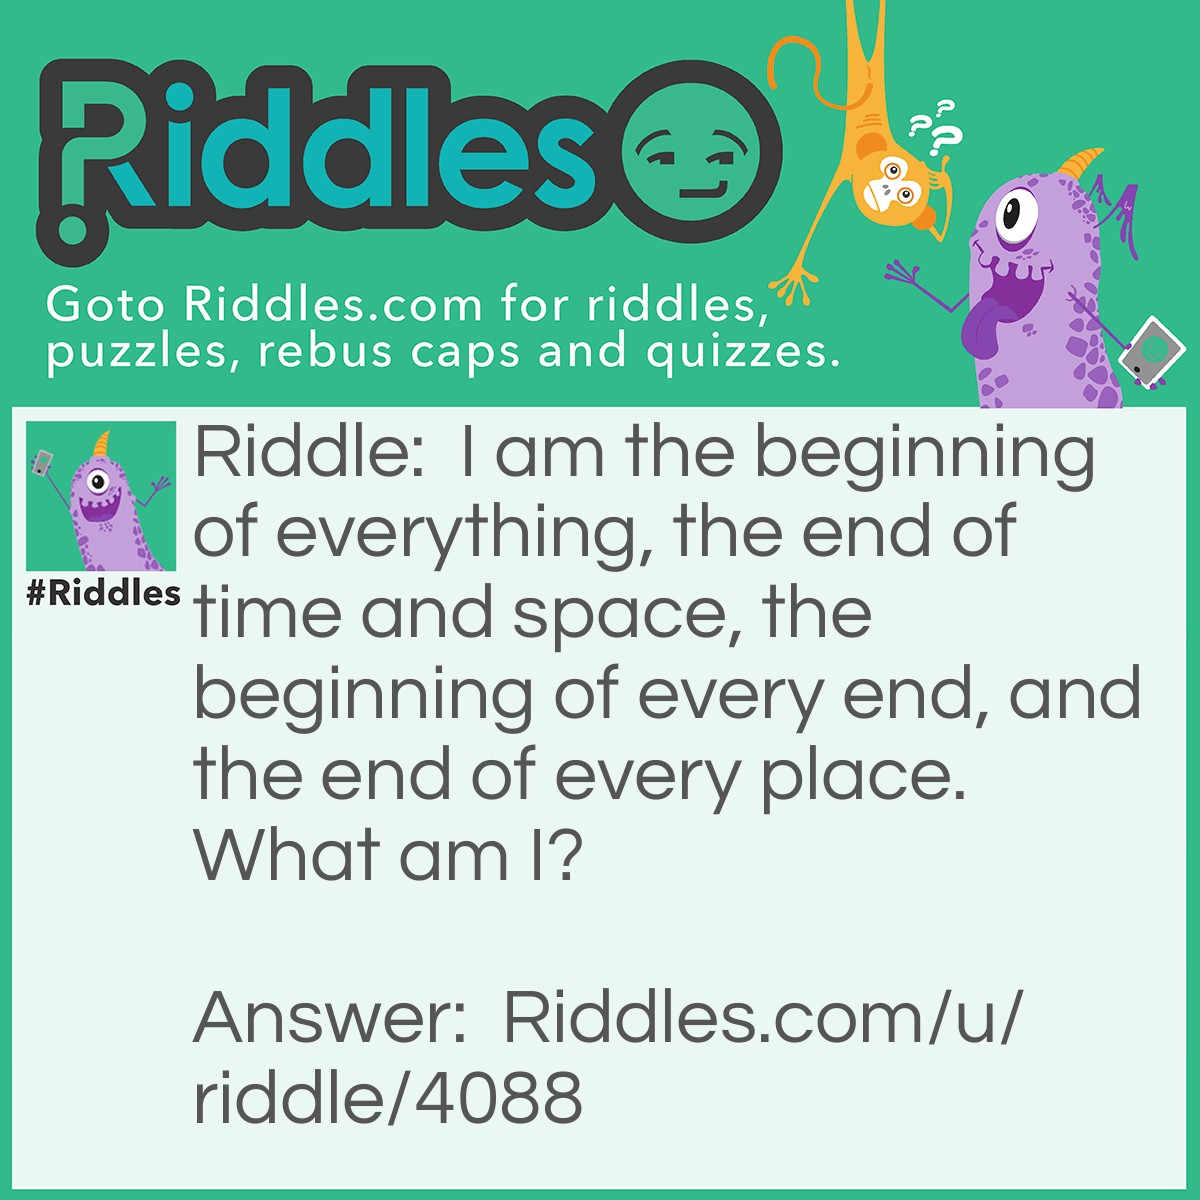 Riddle: I am the beginning of everything, the end of time and space, the beginning of every end, and the end of every place. What am I? Answer: The letter E.